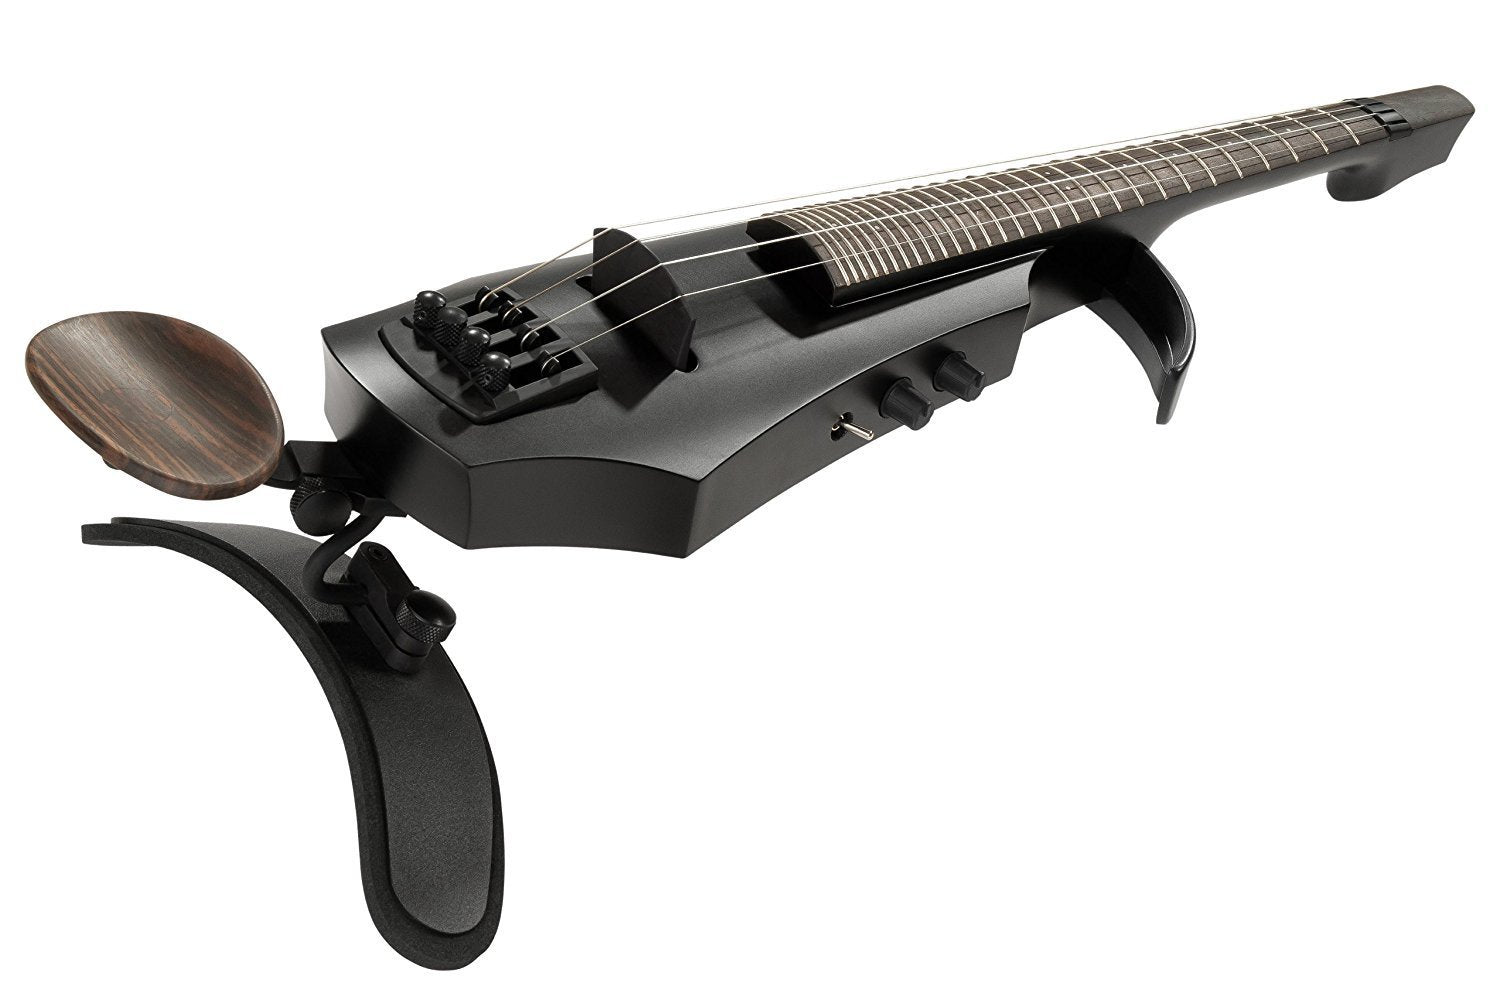 NS Design NXT 4-String Fretted Electric Violin, black maple body, side view